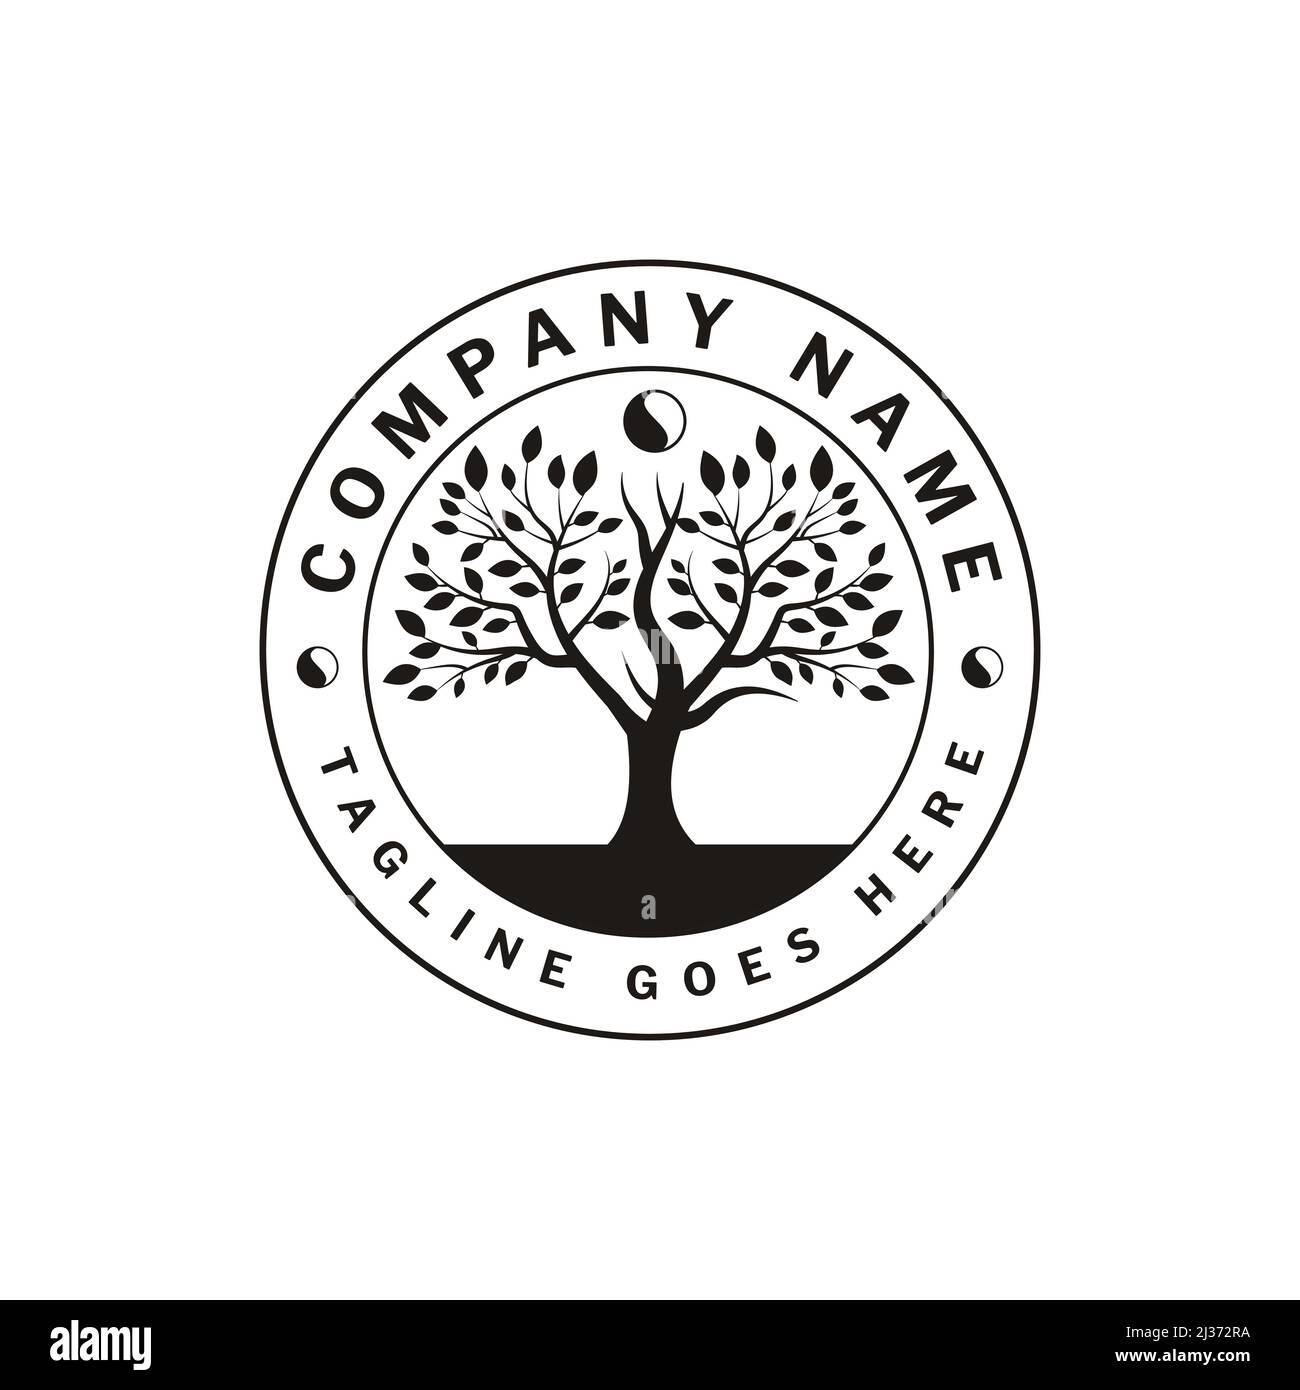 Family Tree of Life Stamp Seal Emblem.Vintage illustration of tree silhouette logo Stock Vector